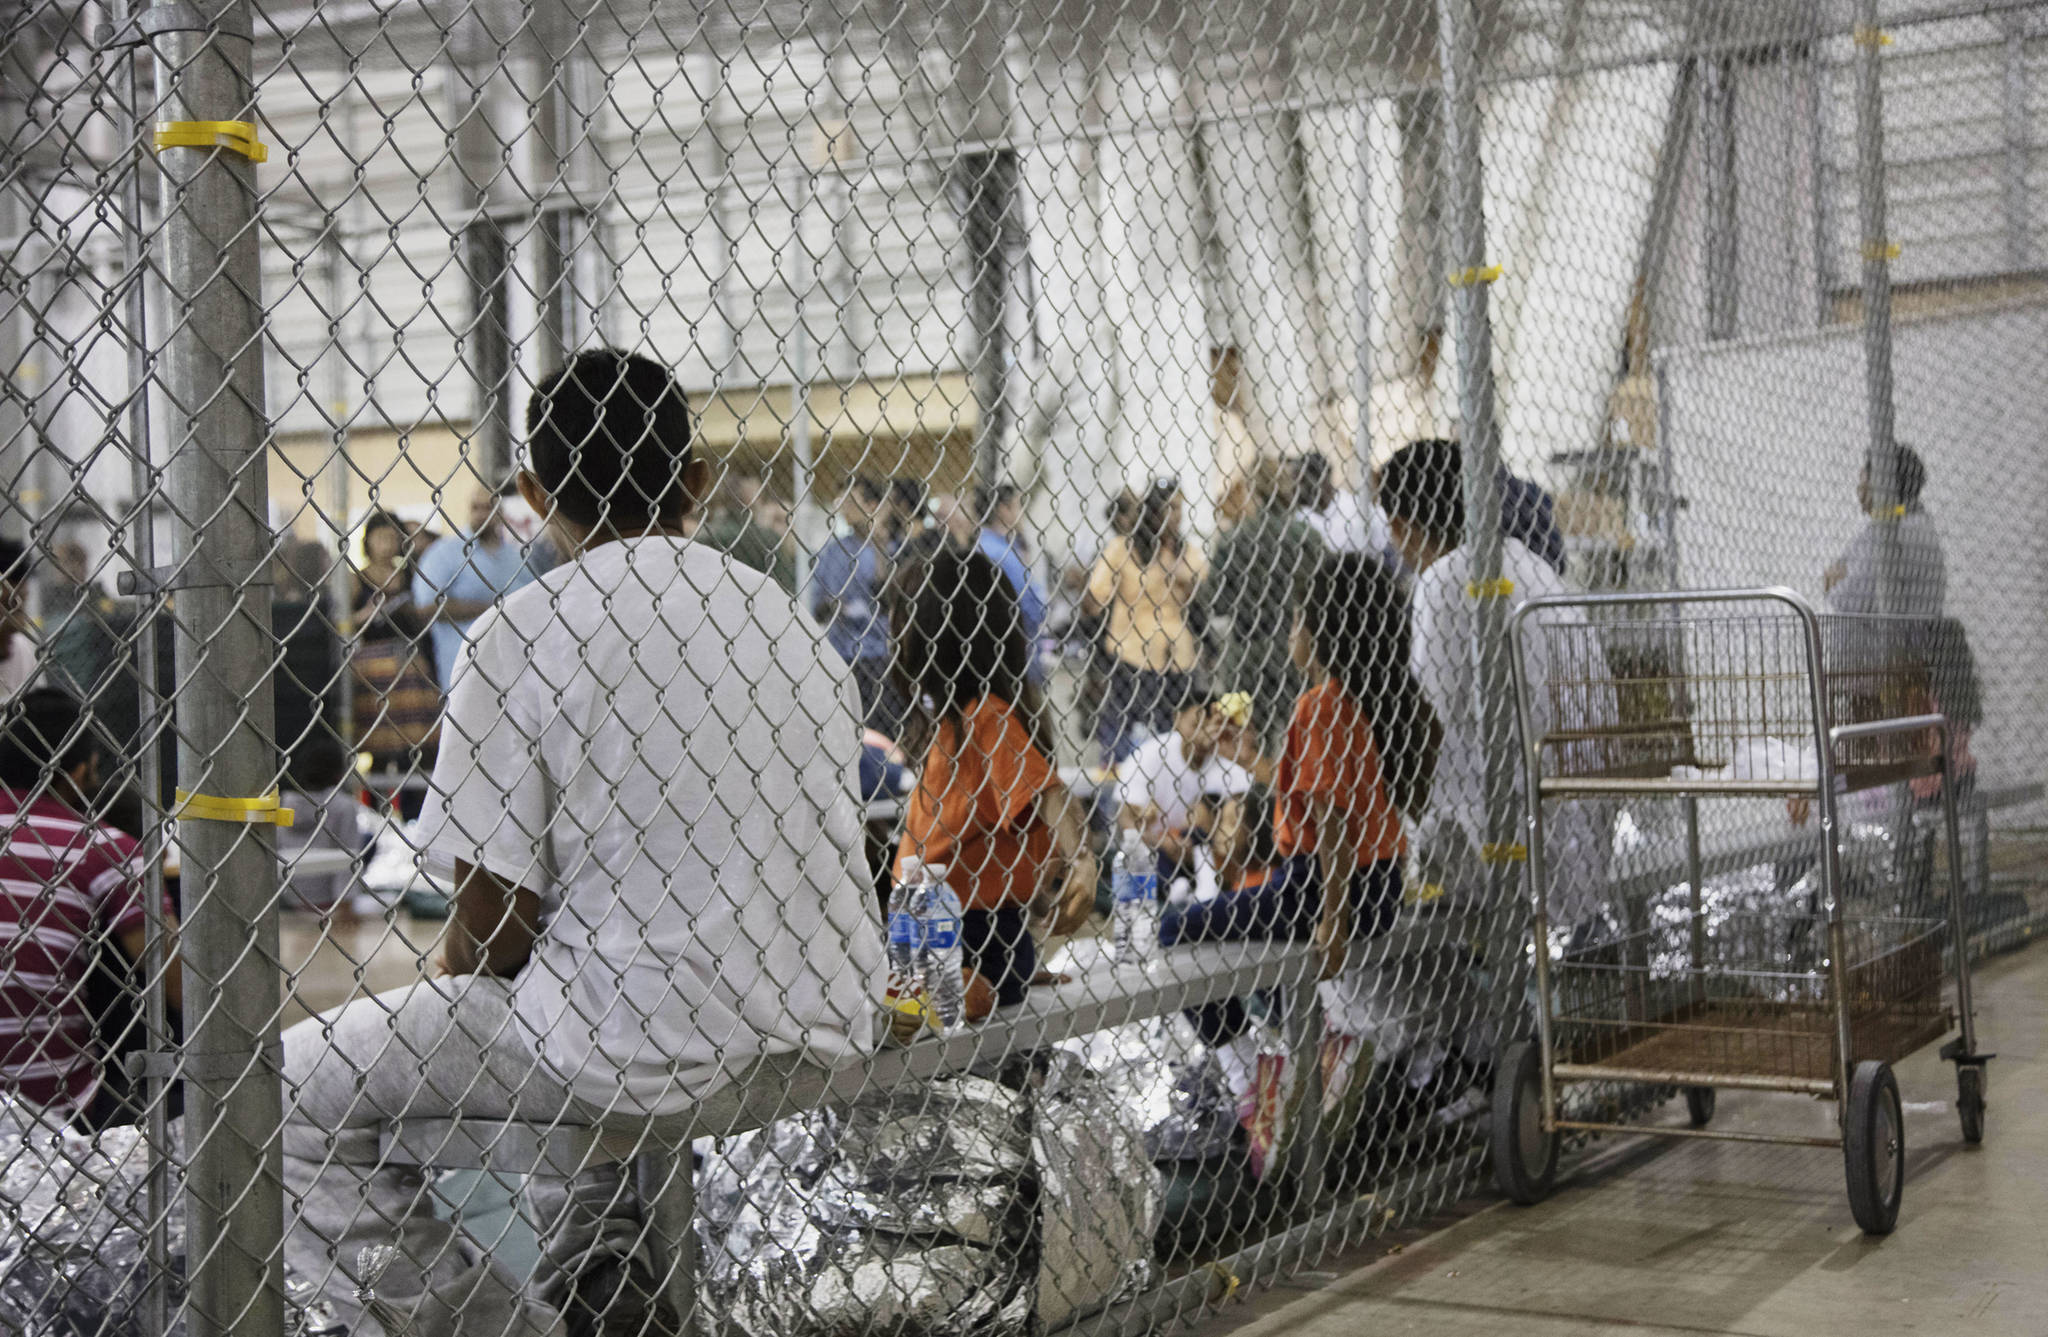 In this photo provided by U.S. Customs and Border Protection, people who’ve been taken into custody related to cases of illegal entry into the United States, sit in one of the cages at a facility in McAllen, Texas, Sunday, June 17, 2018. (U.S. Customs and Border Protection’s Rio Grande Valley Sector via AP)